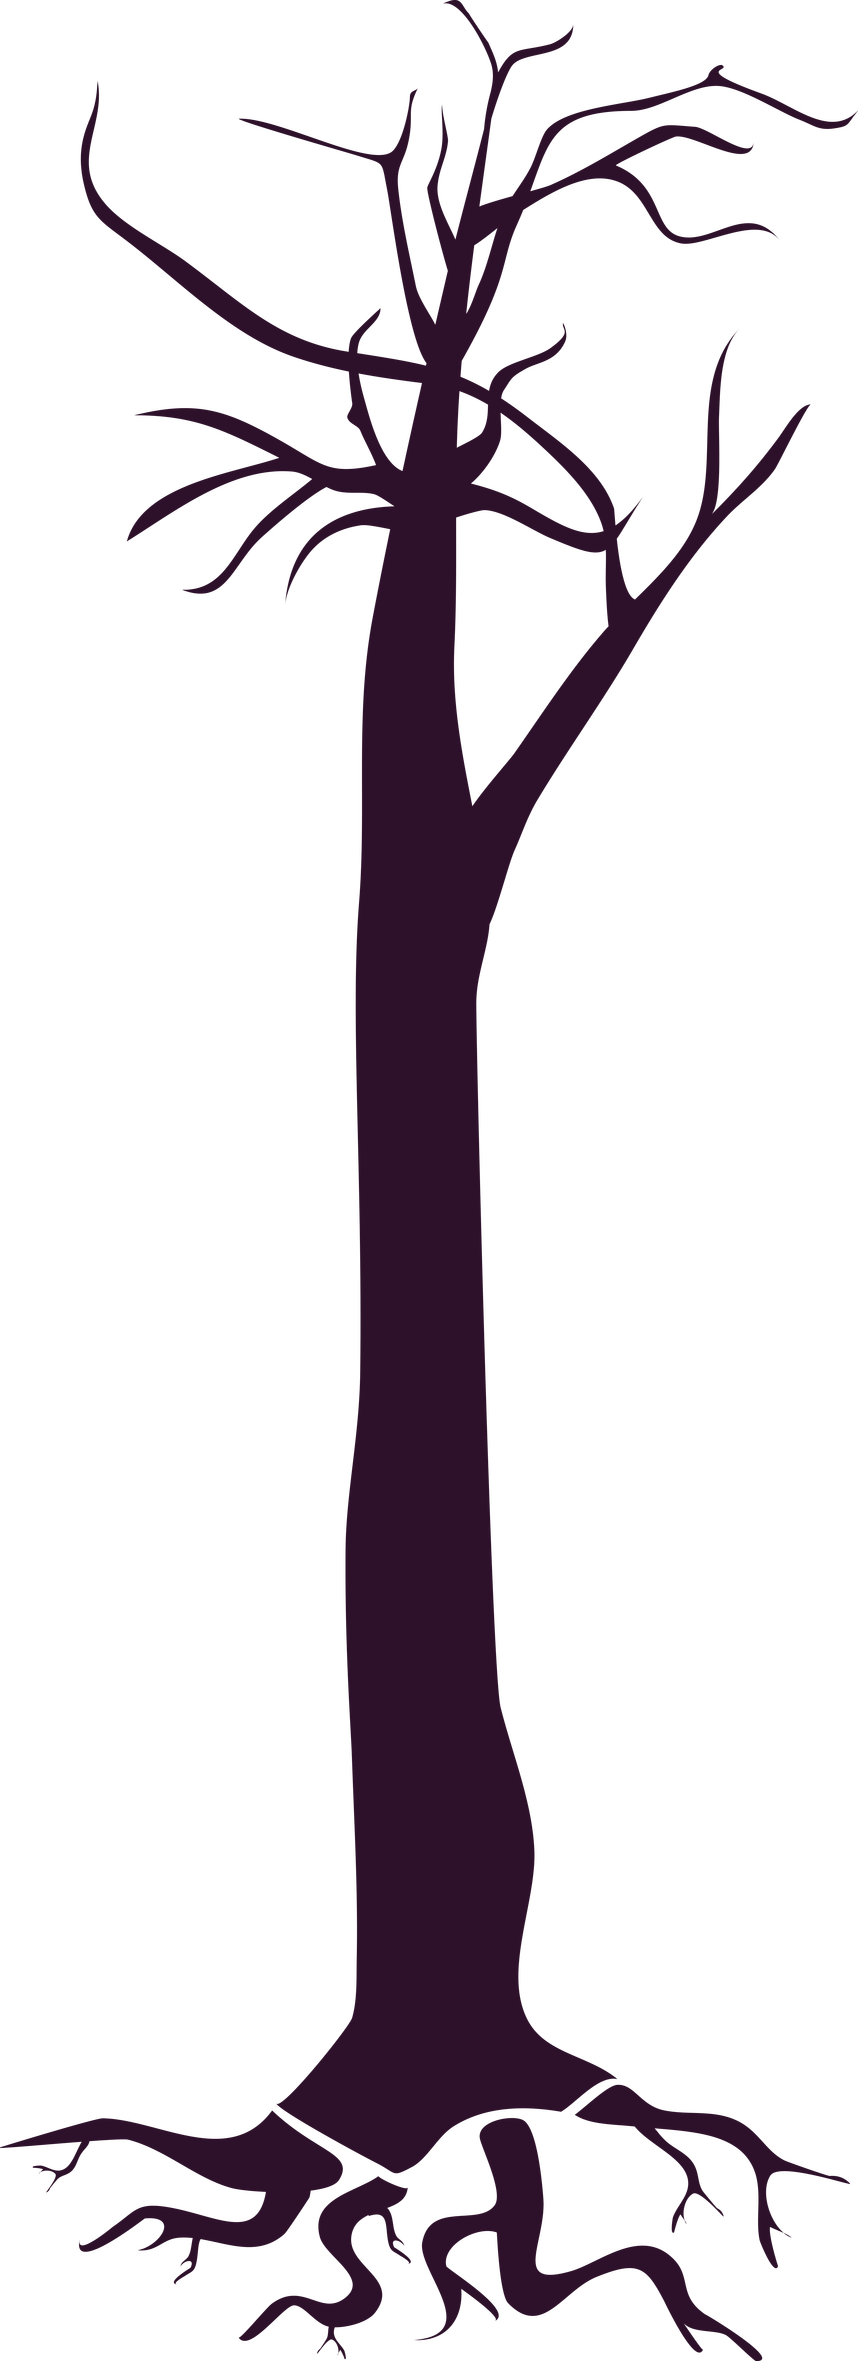 Tree Branch Clipart - Silhouette - Png Download (858x2361), Png Download